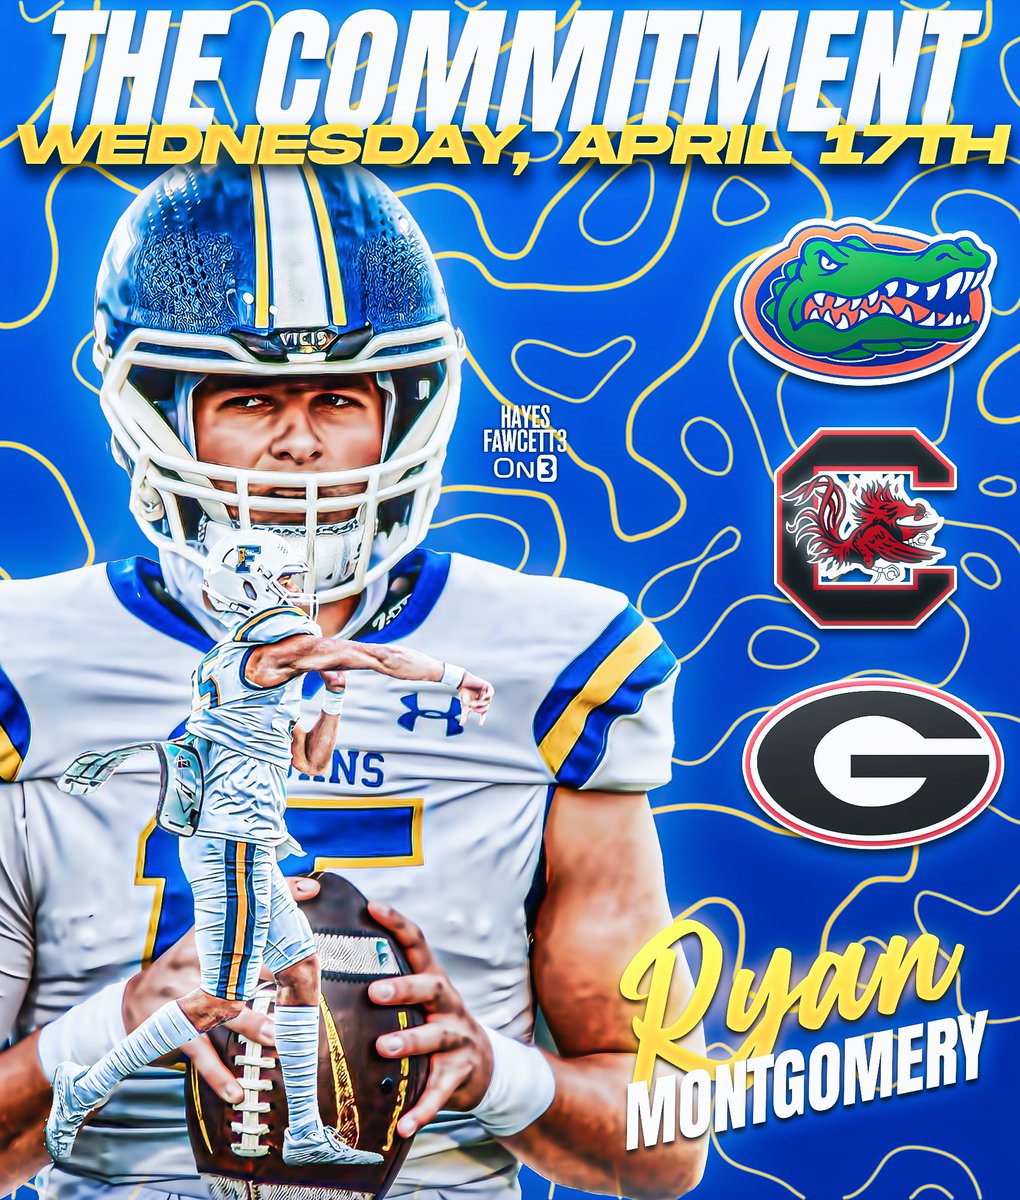 BREAKING: Four-Star QB Ryan Montgomery will announce his Commitment on Wednesday, April 17th, he tells me for @On3Recruits 👀 The 6’4 215 QB from Findlay, OH will choose between Florida, Georgia, and South Carolina Where Should He Go?👇🏽 on3.com/db/ryan-montgo…